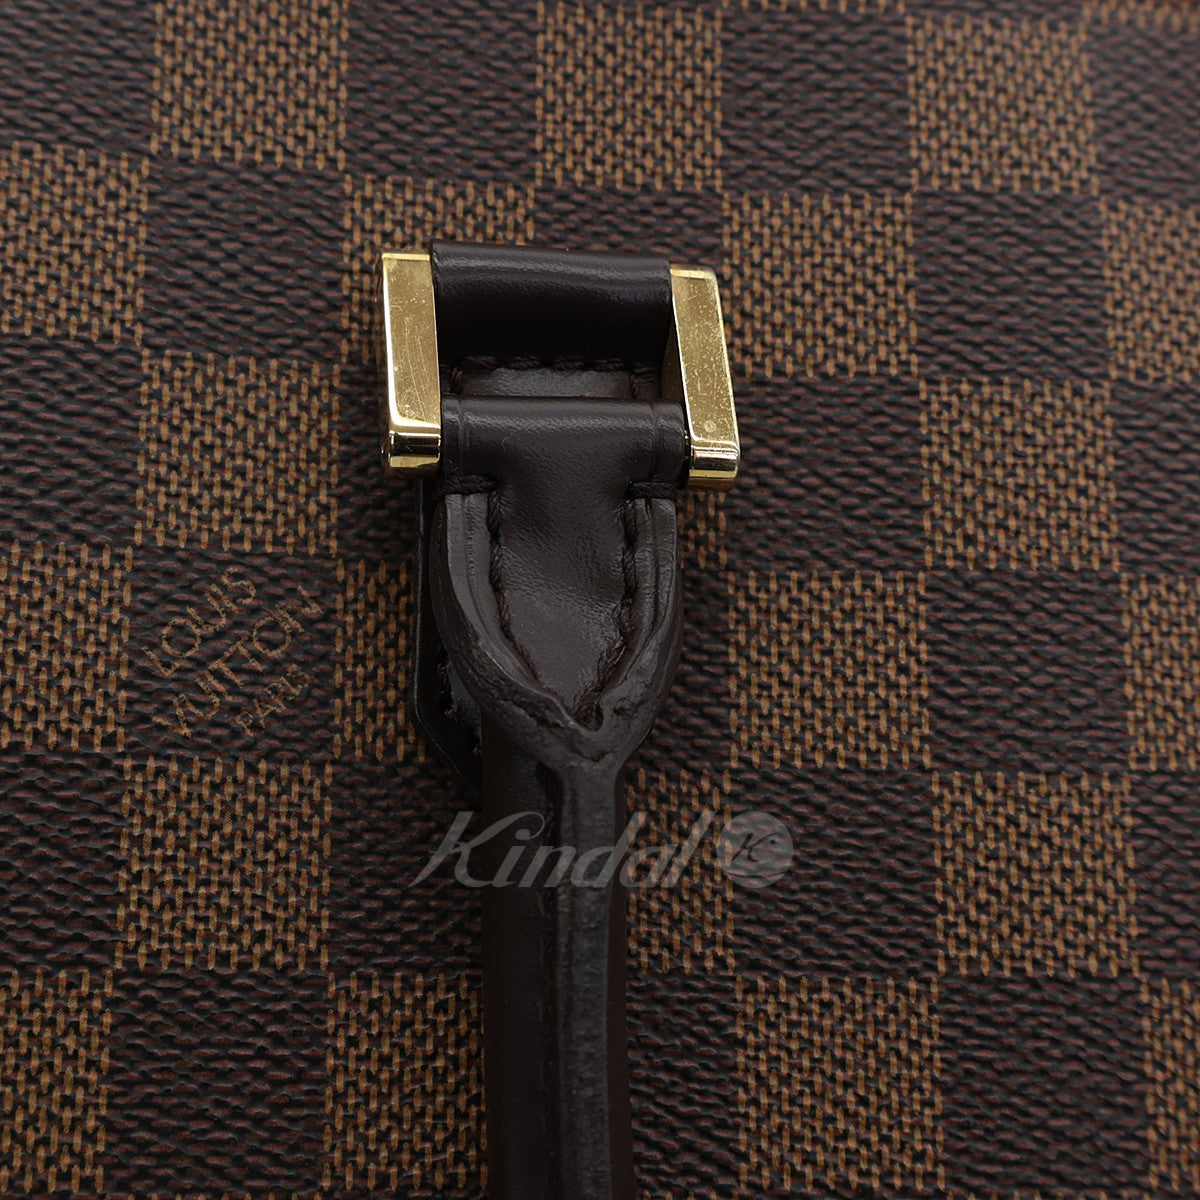 LOUIS VUITTON(ルイヴィトン) ダミエ ヴェニスPM トートバッグ N51145 ...